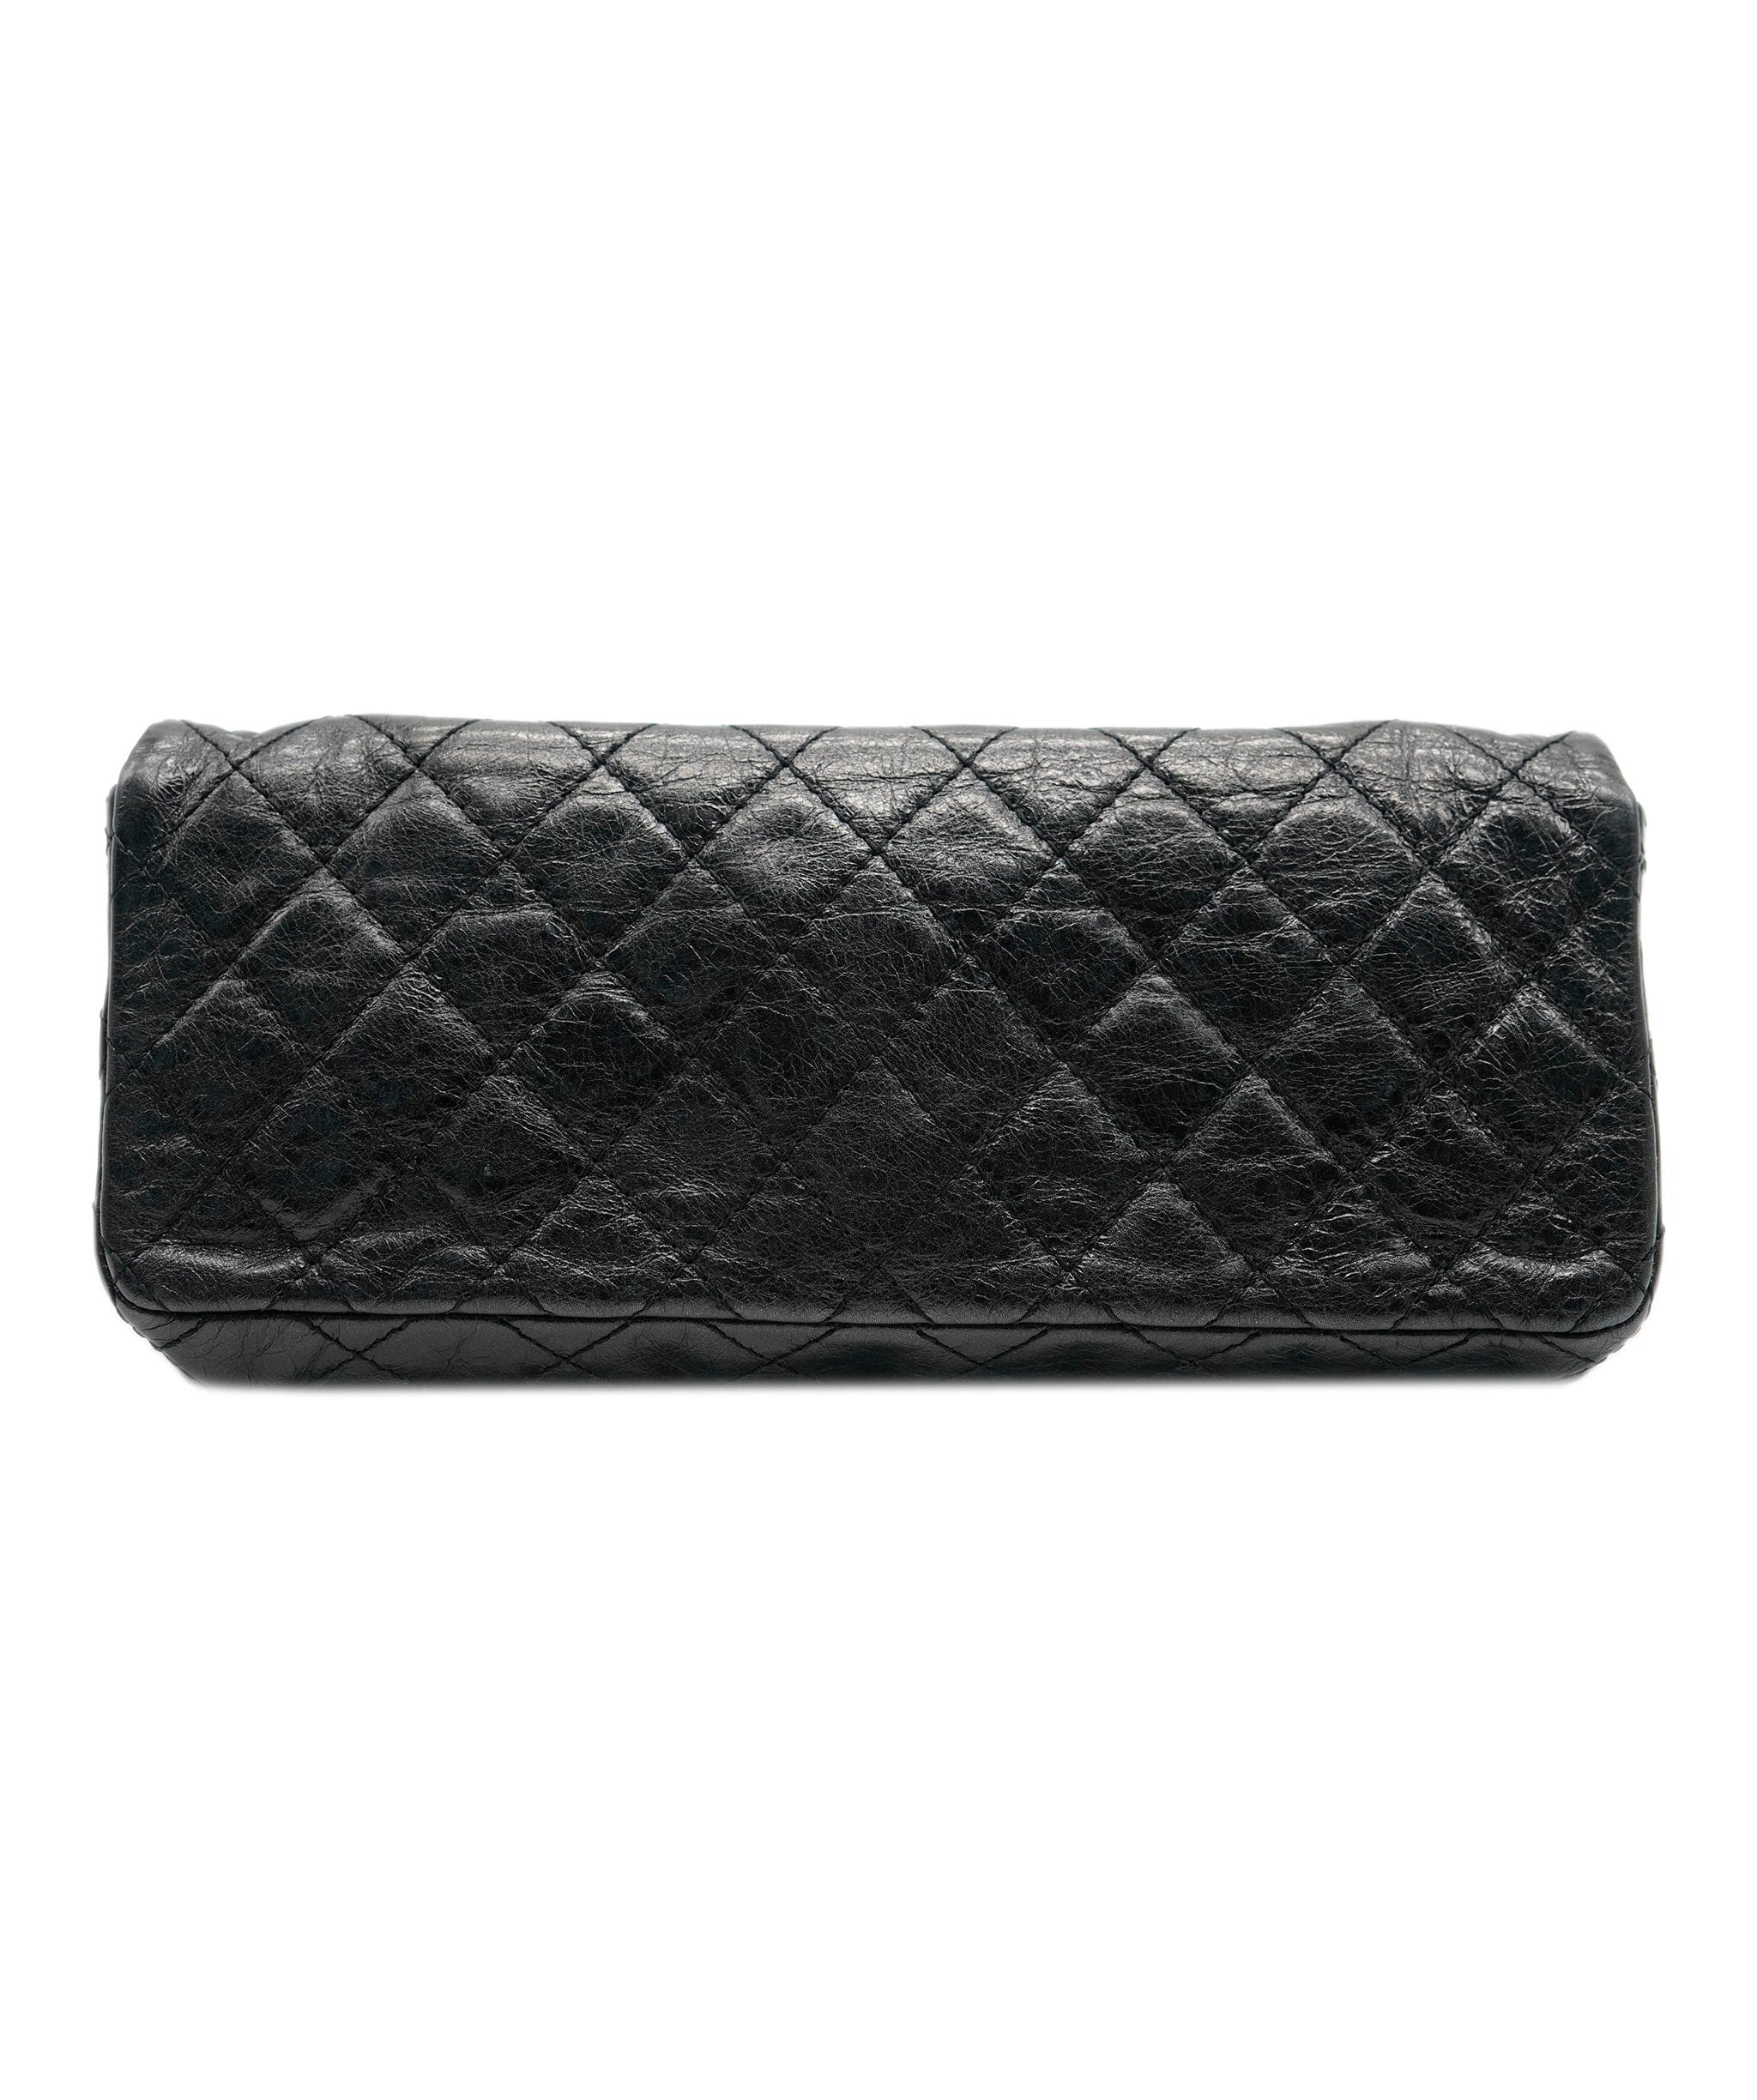 Chanel Vintage Chanel Black Long Timeless GHW ALC0578